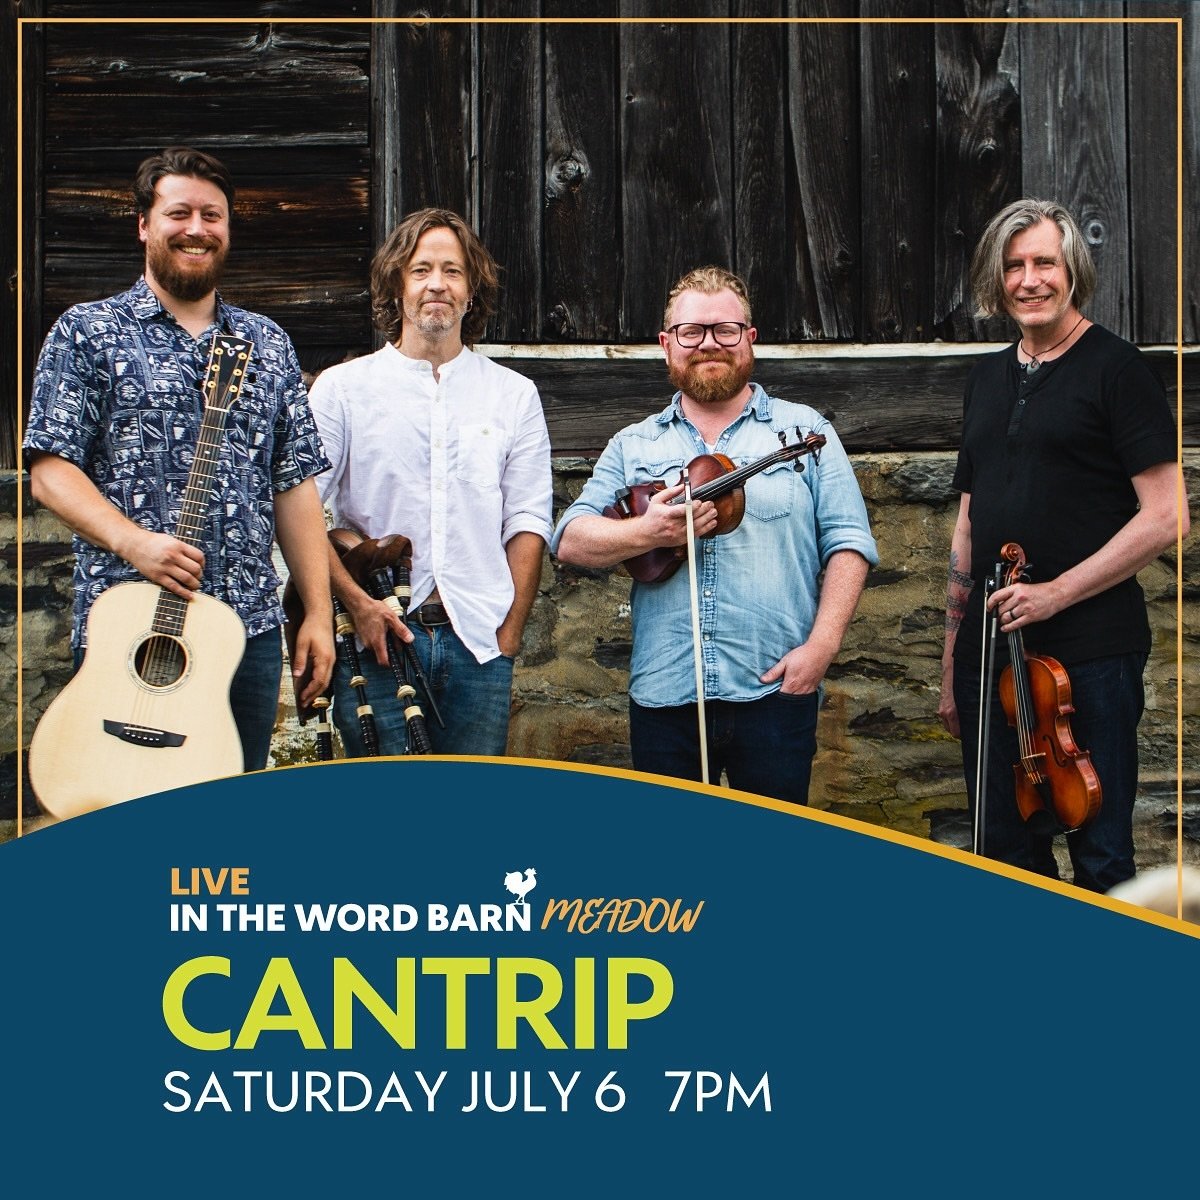 Happy to announce tickets are now on sale for this show in #exeternh at @thewordbarn . Get em at the link in our bio.

#cantrip #bagpipes #thewordbarn #nhmusic #scottishmusic #trad #folk